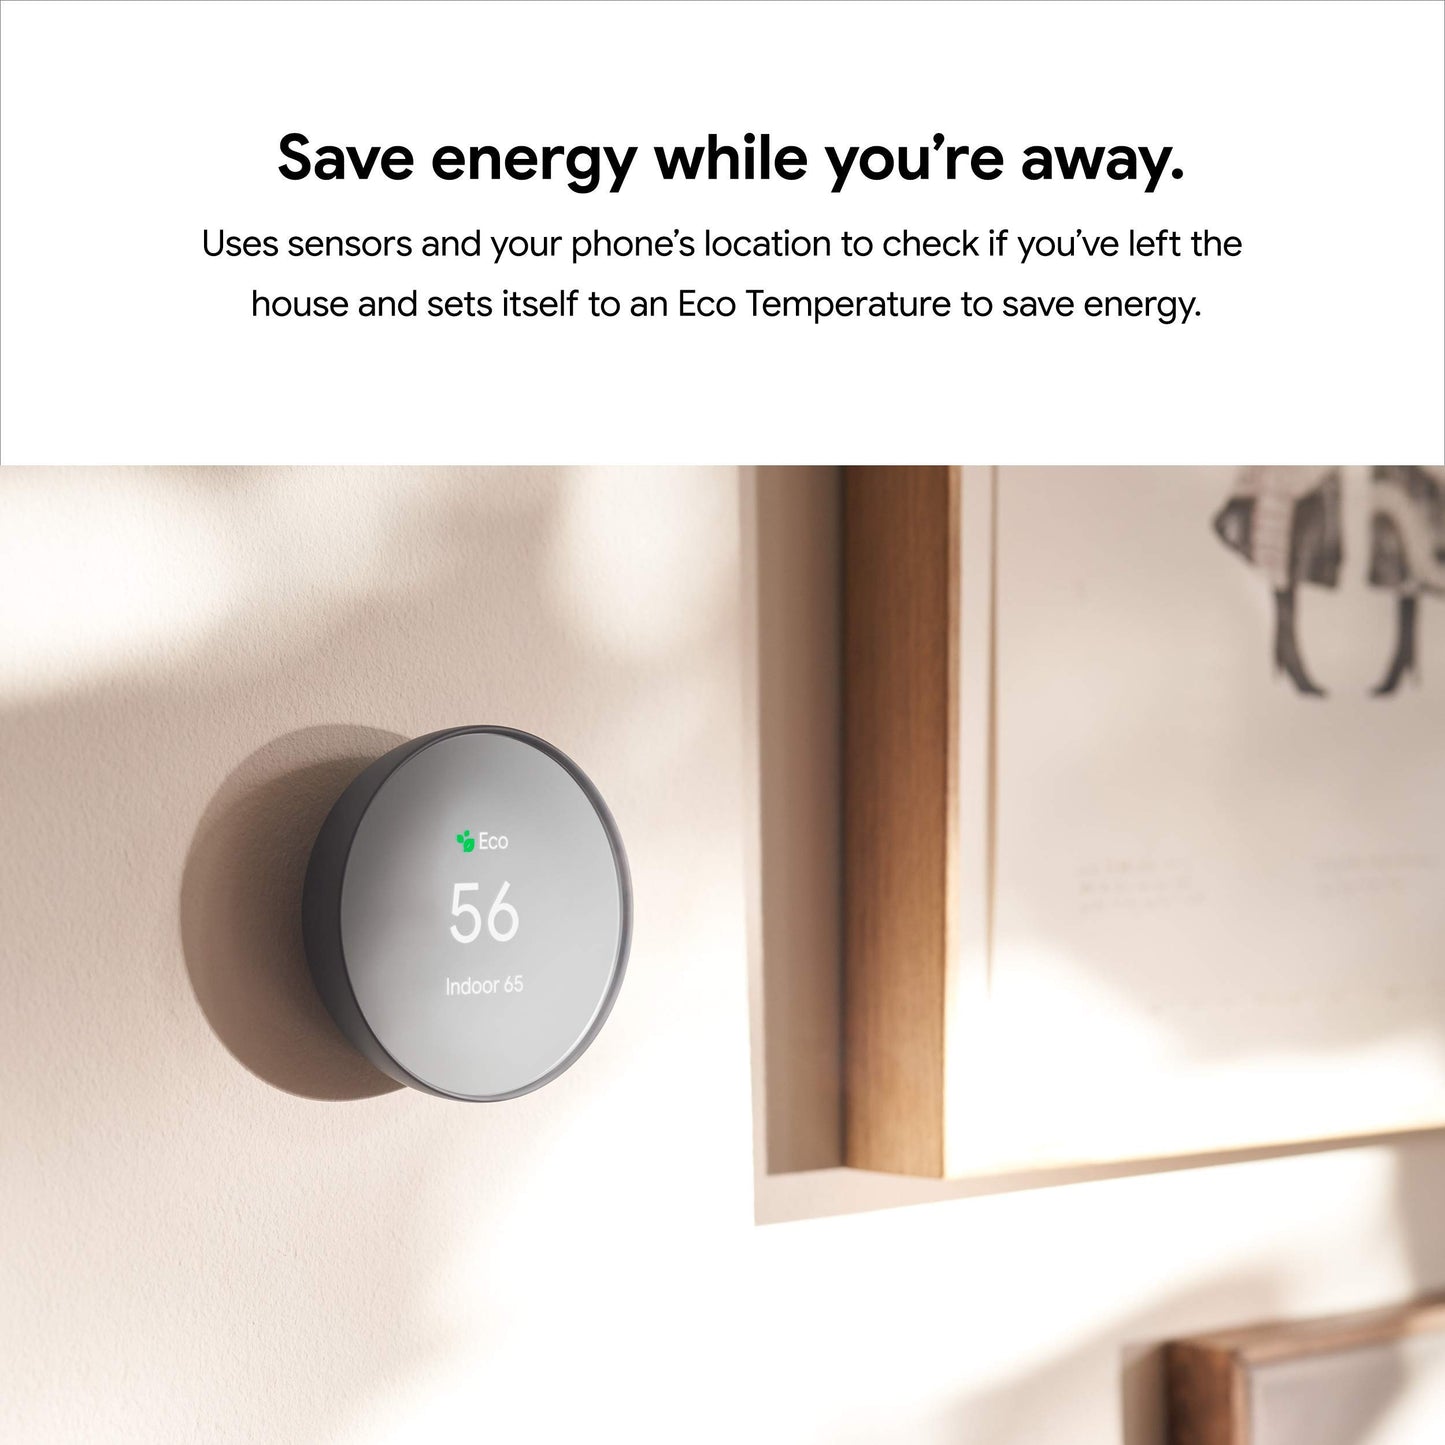 Google Nest Thermostat - Smart Thermostat for Home - Programmable Wifi Thermostat - Charcoal (Refurbished)